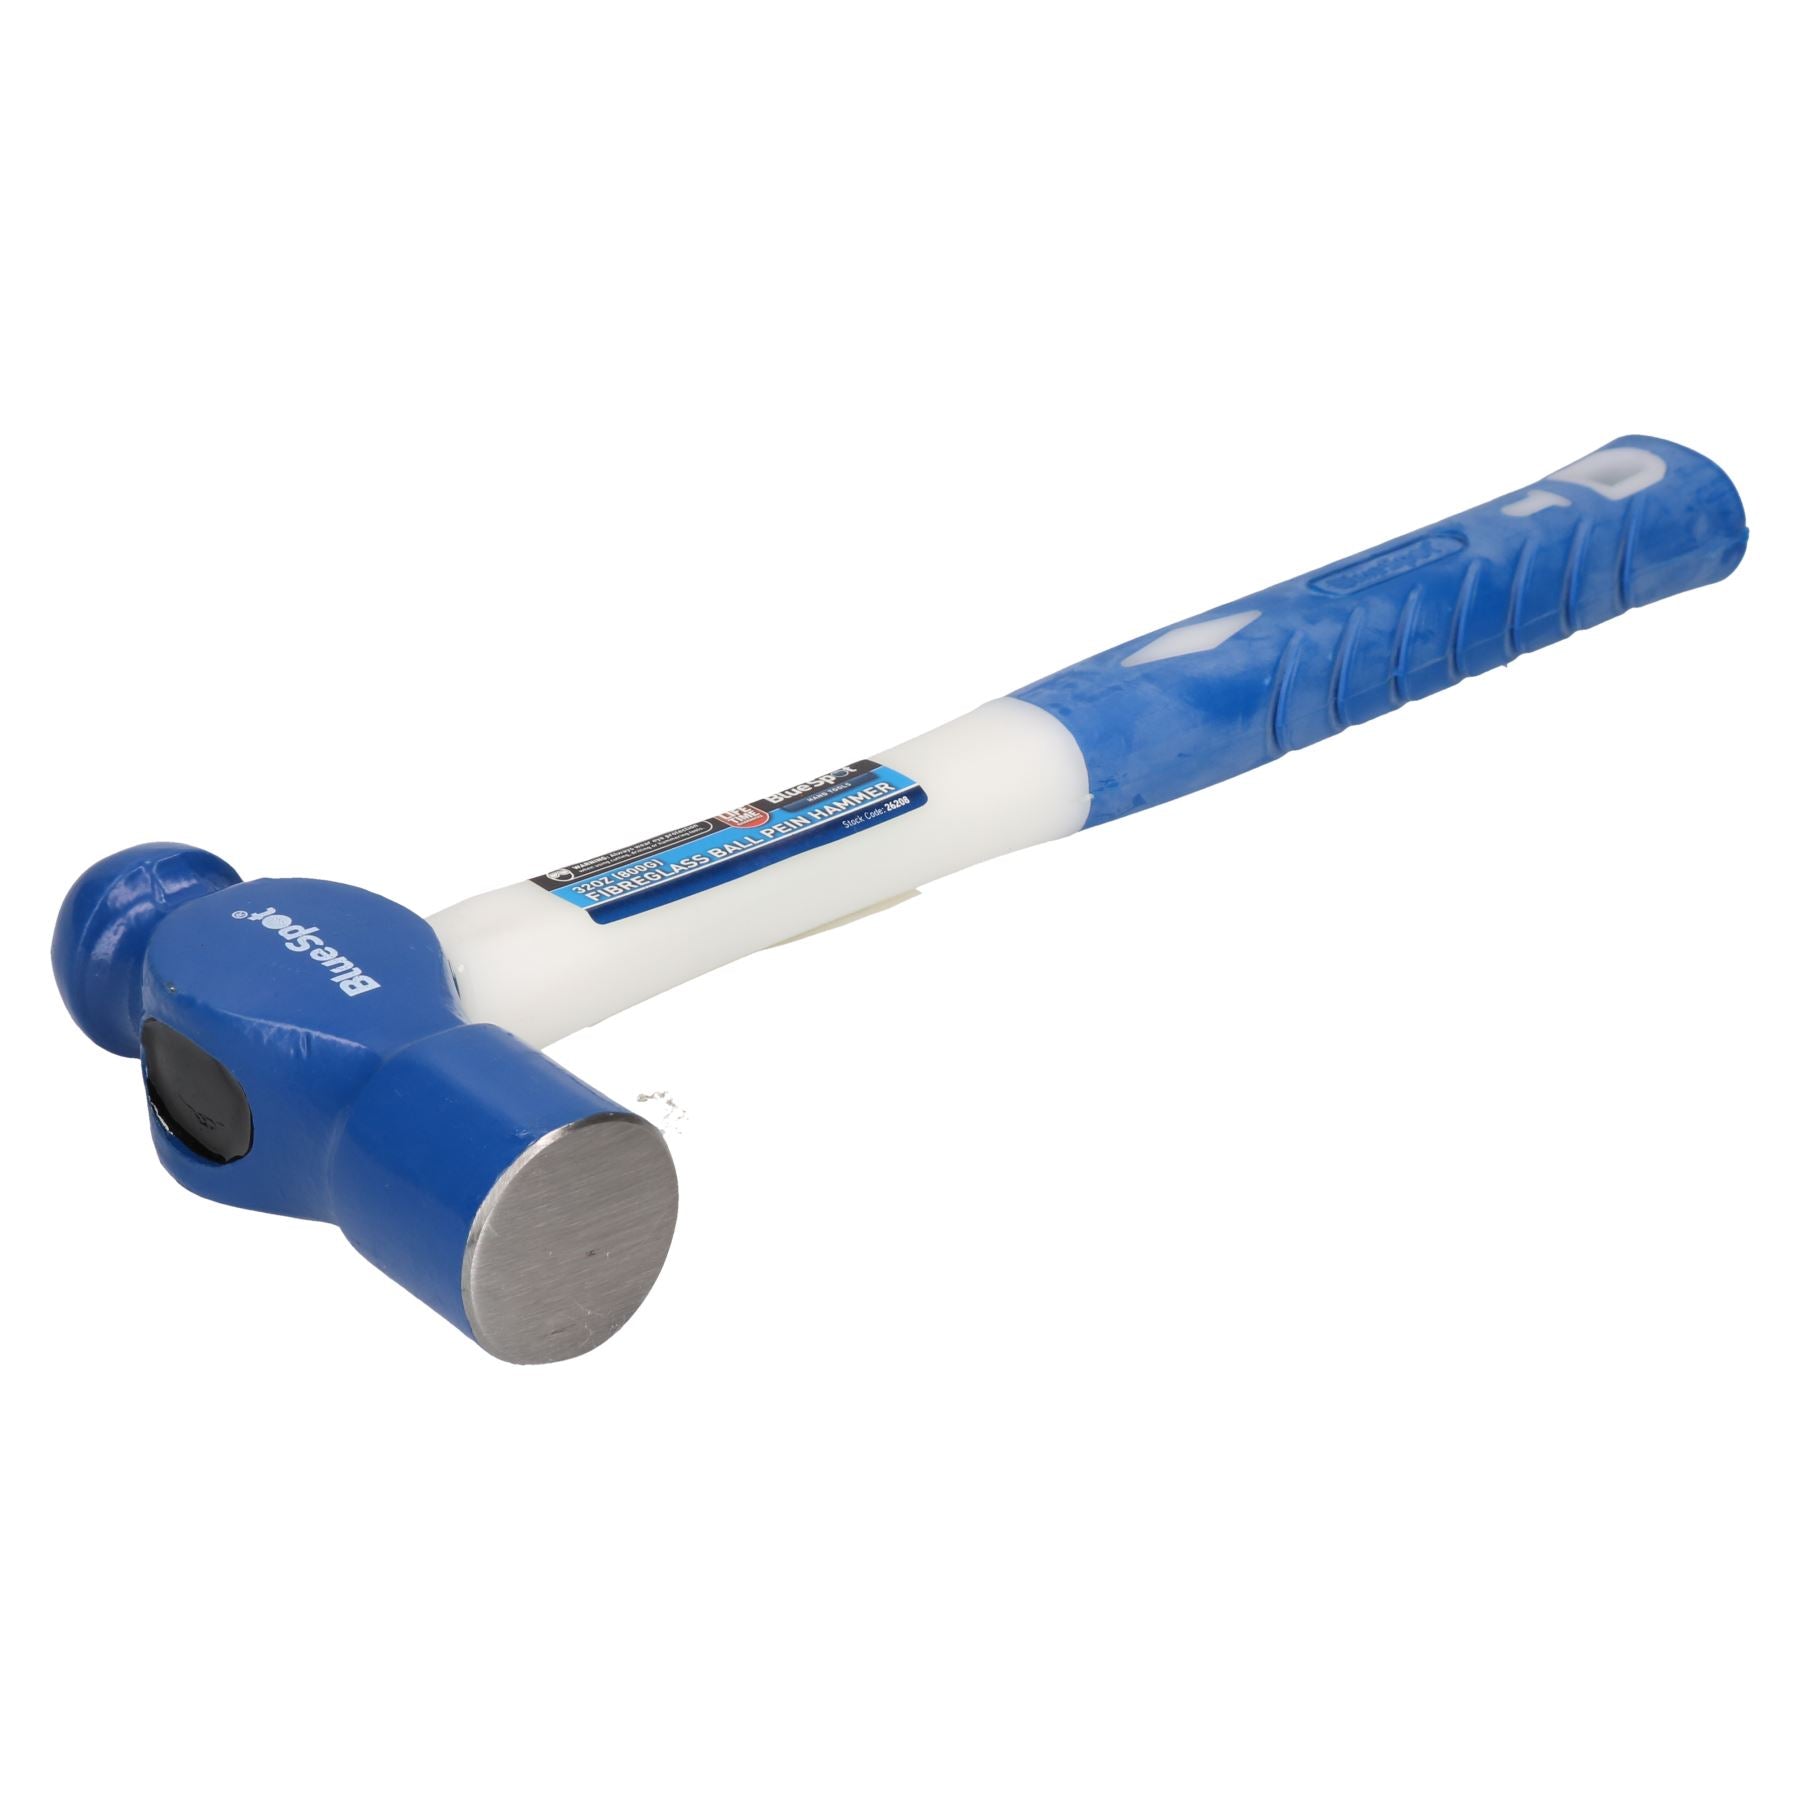 32oz (800g) Ball Pein Hammer with Fibreglass Shaft and TPR Rubberised Handle